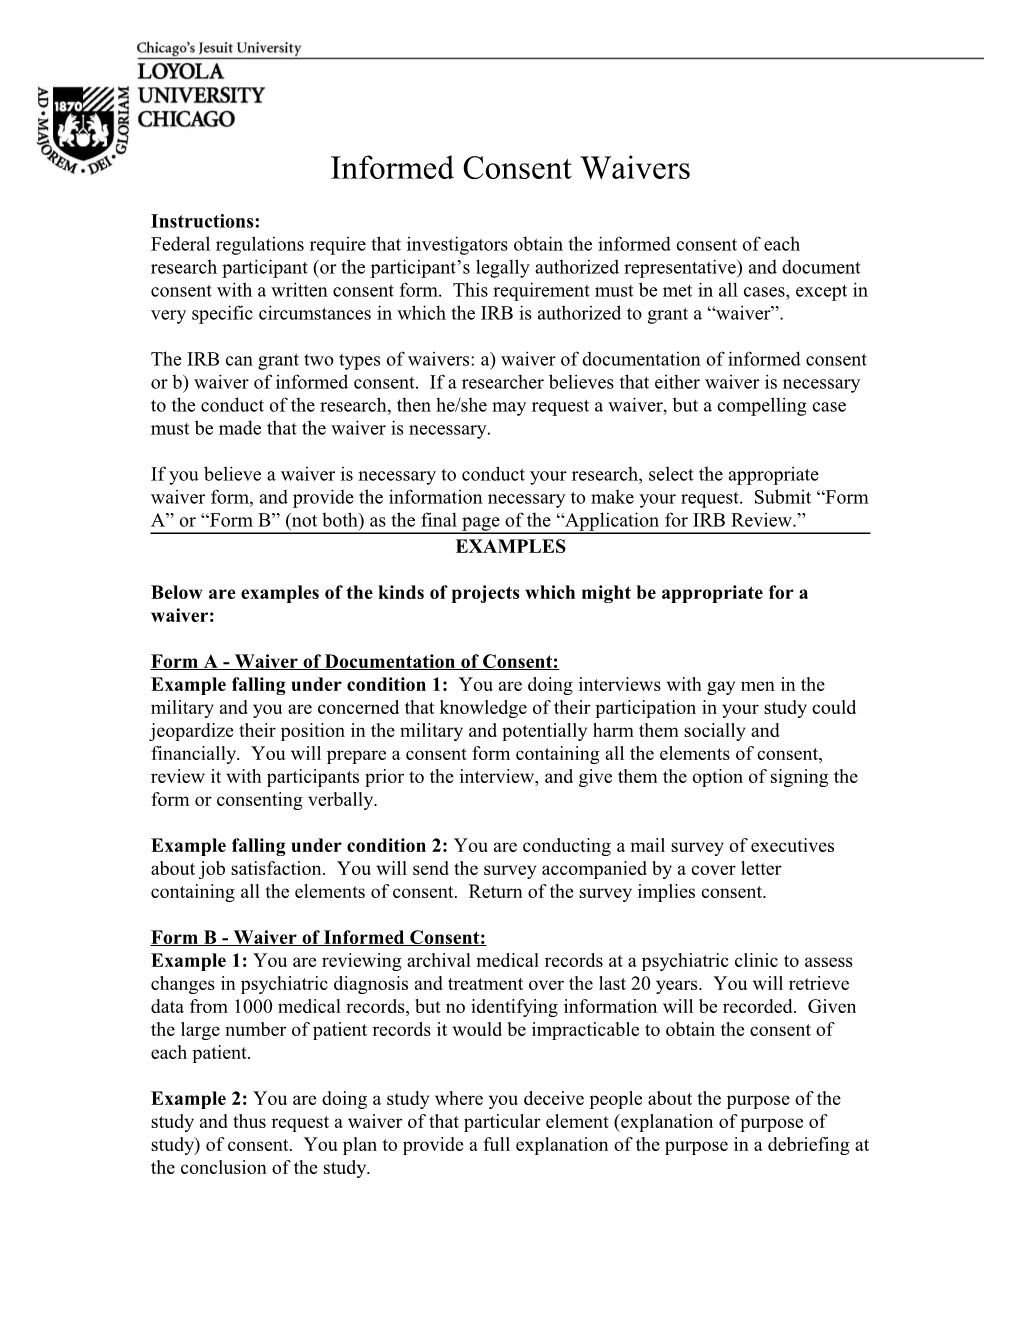 Request for Consent Waiver(S)